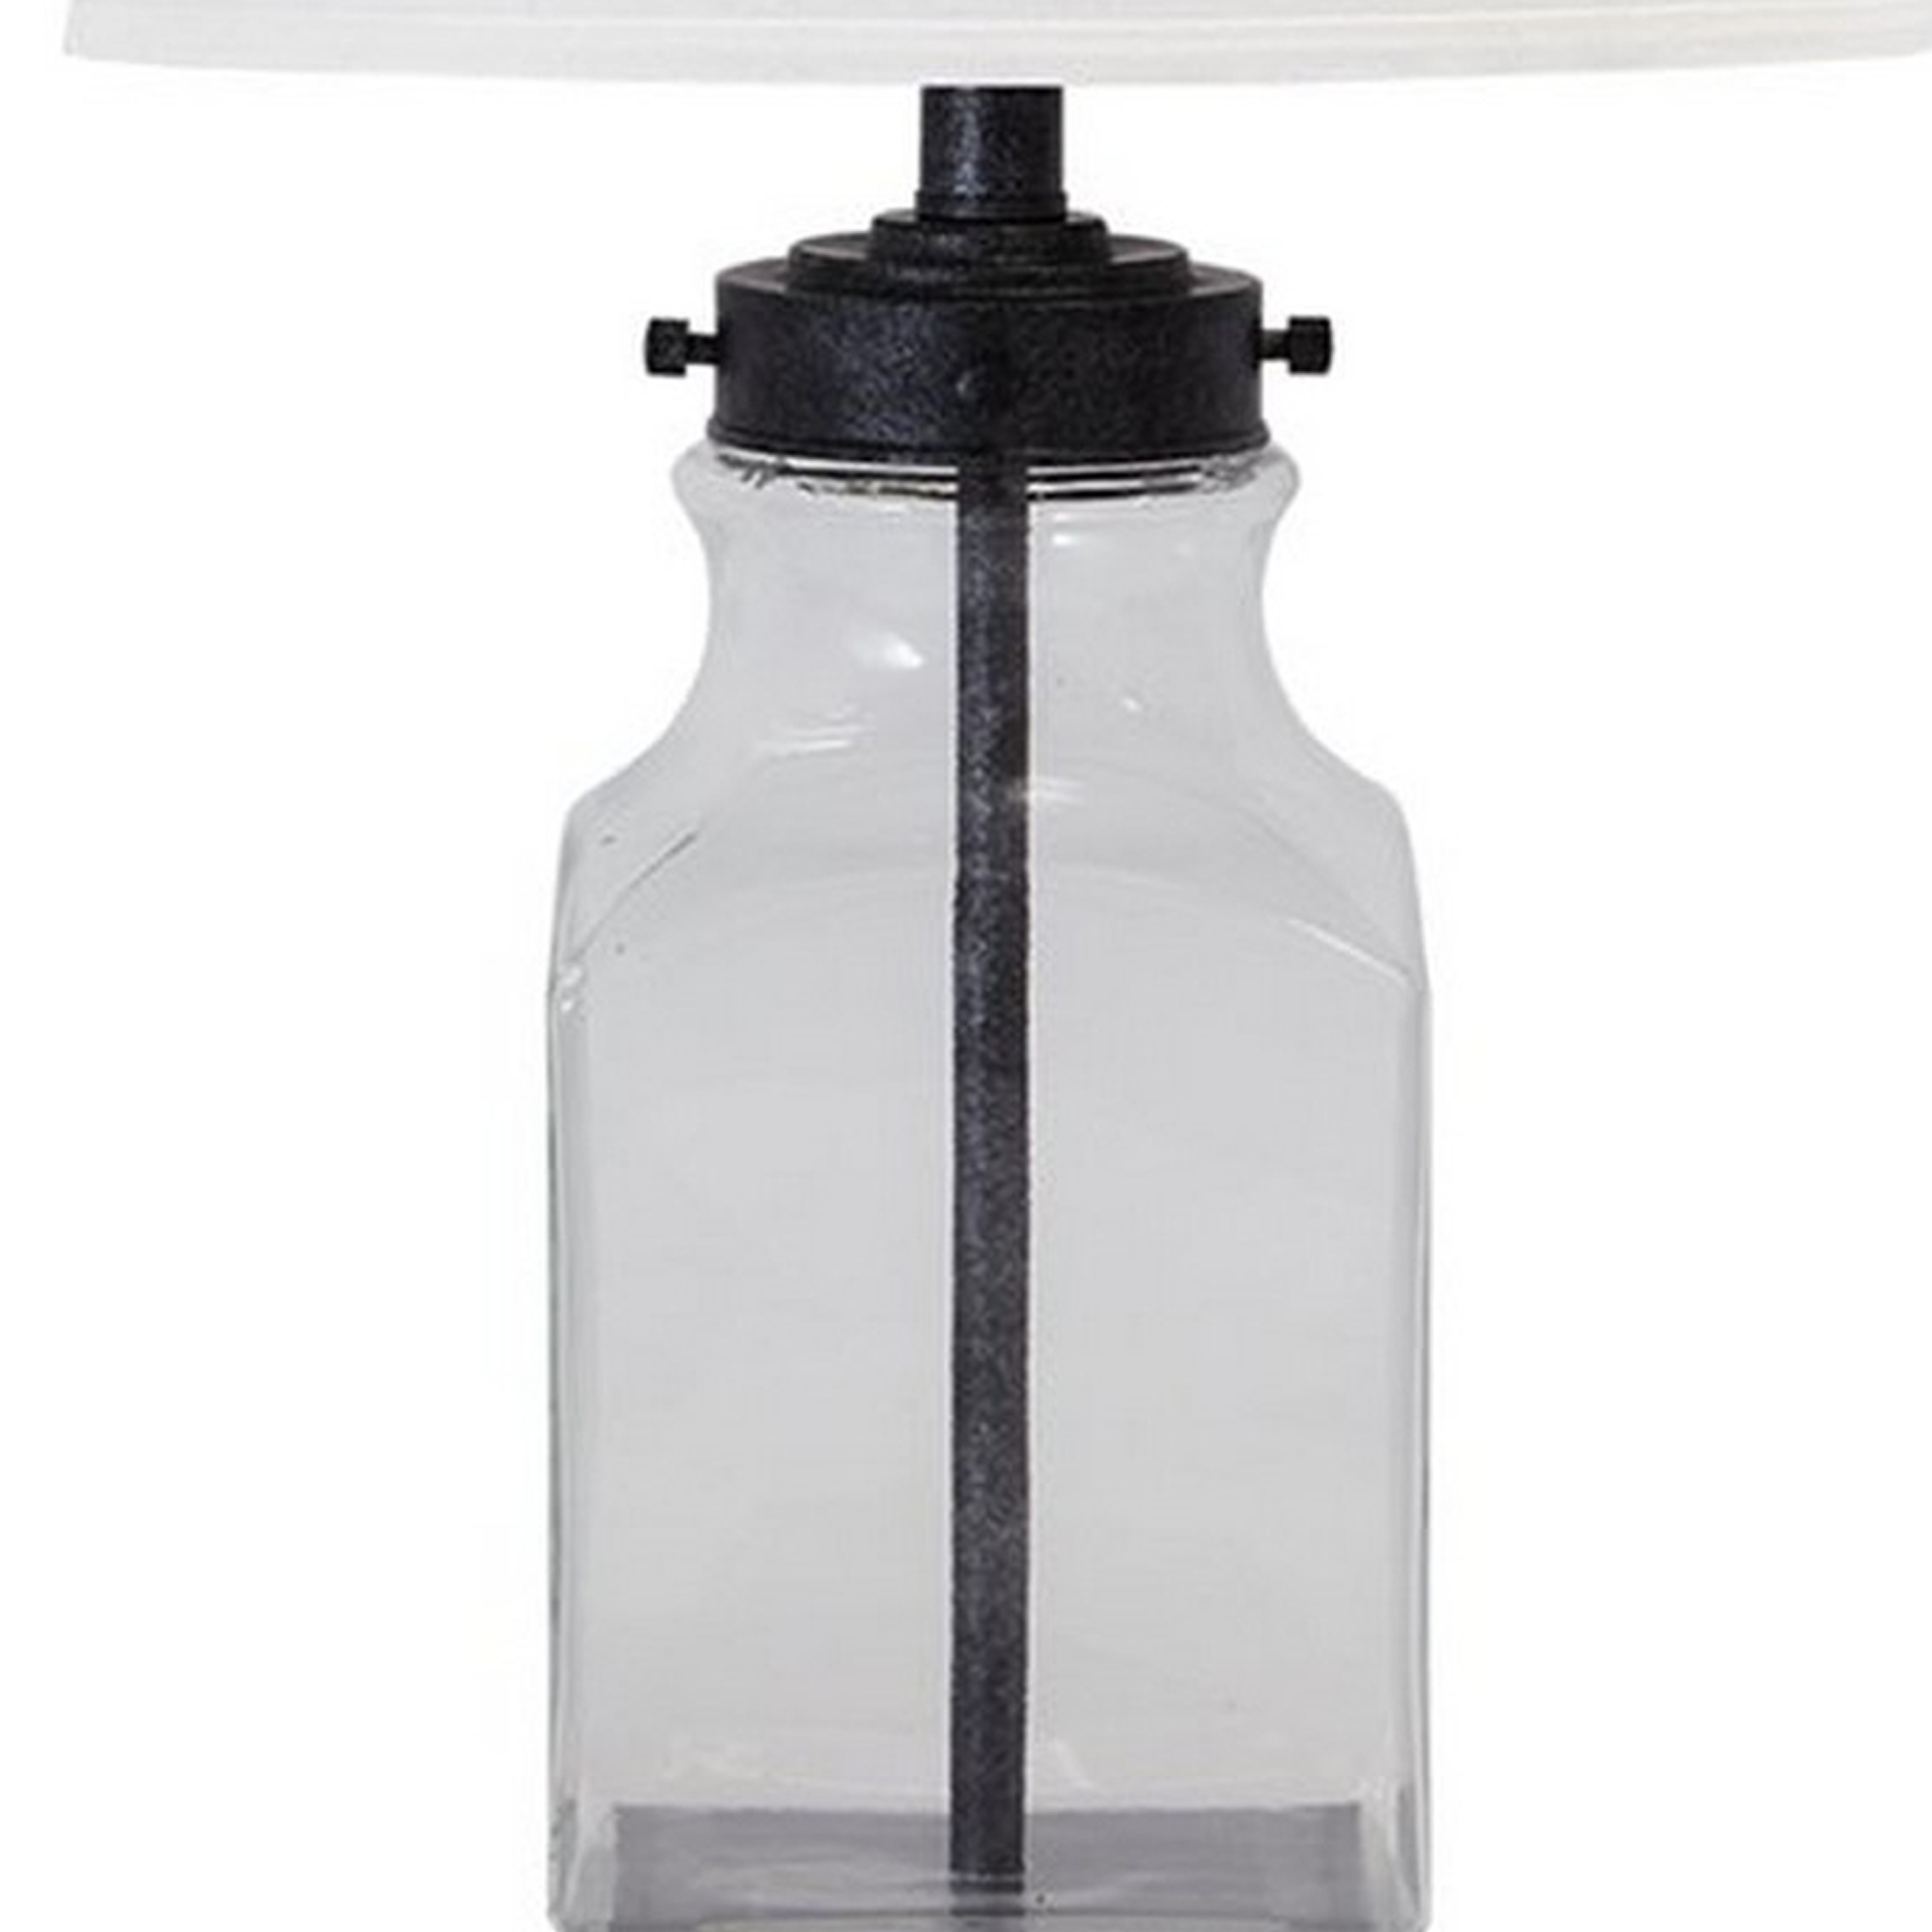 Smoky Glass Frame Table Lamp With Fabric Shade, Light Gray And Clear- Saltoro Sherpi